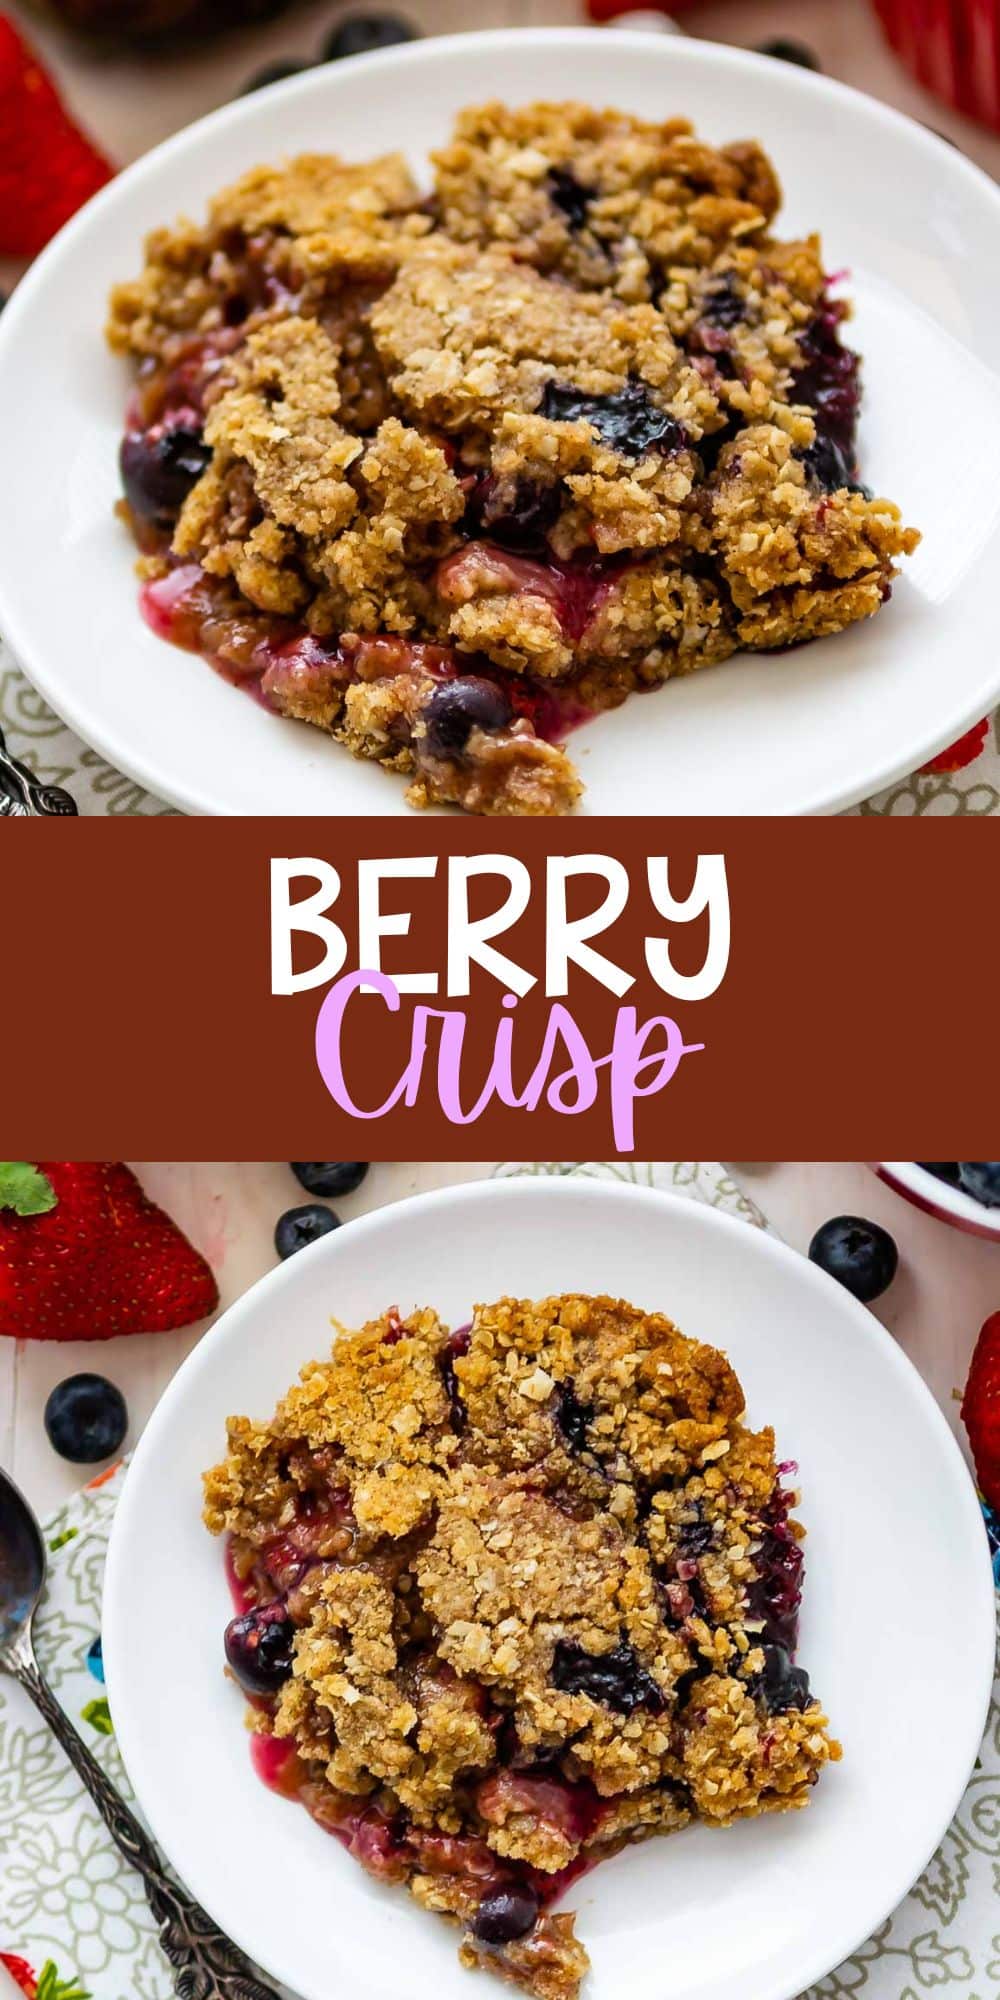 two photos of berry crisp on a white plate mixed with various berries with words on the image.